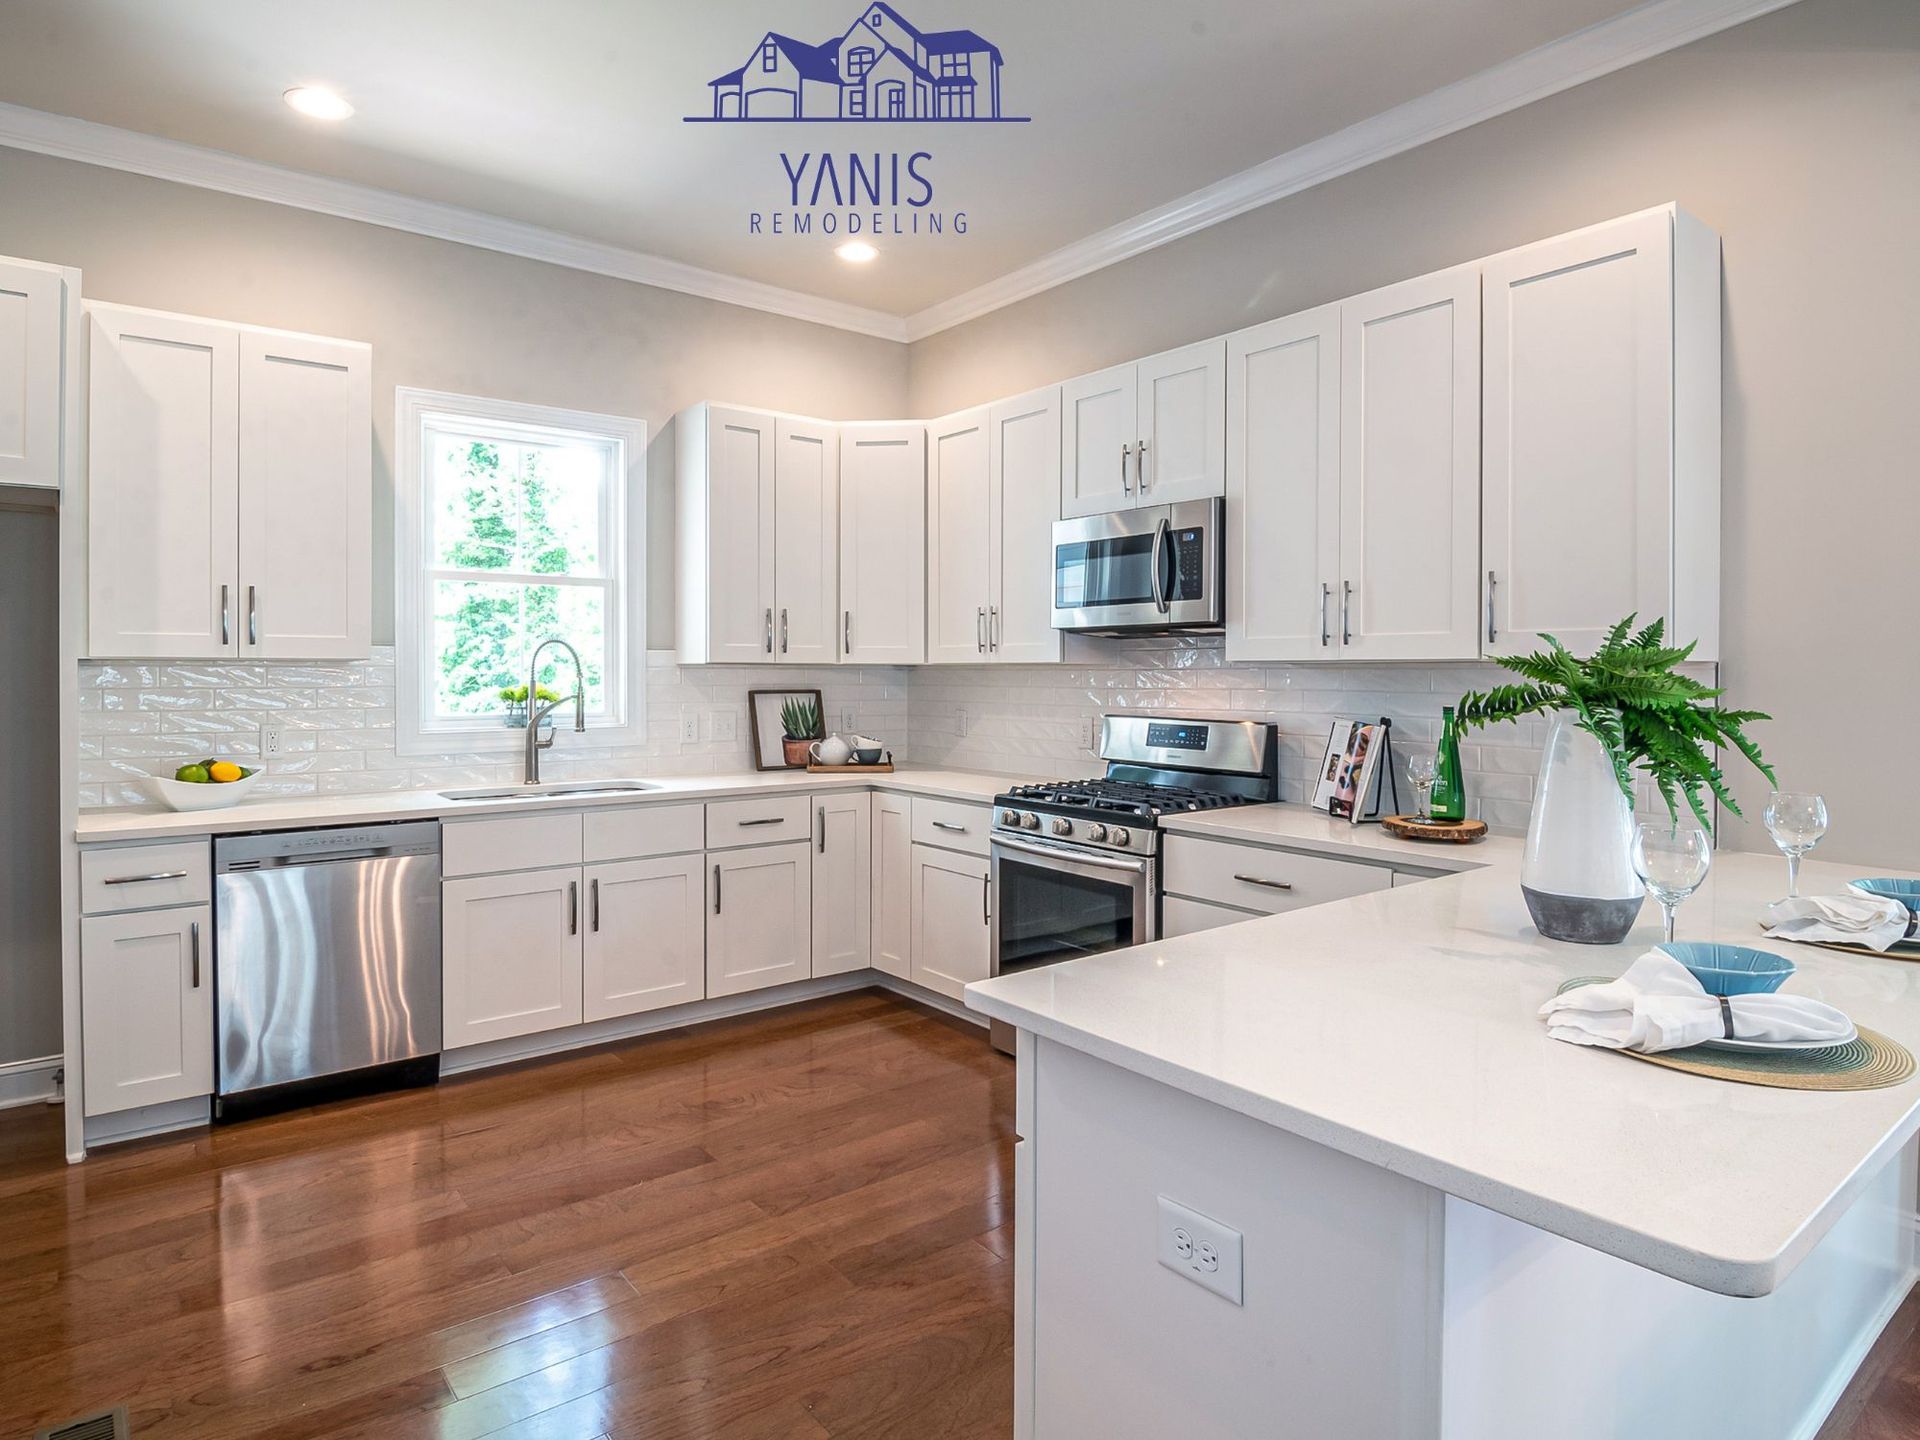 A kitchen with white cabinets , stainless steel appliances , and hardwood floors.